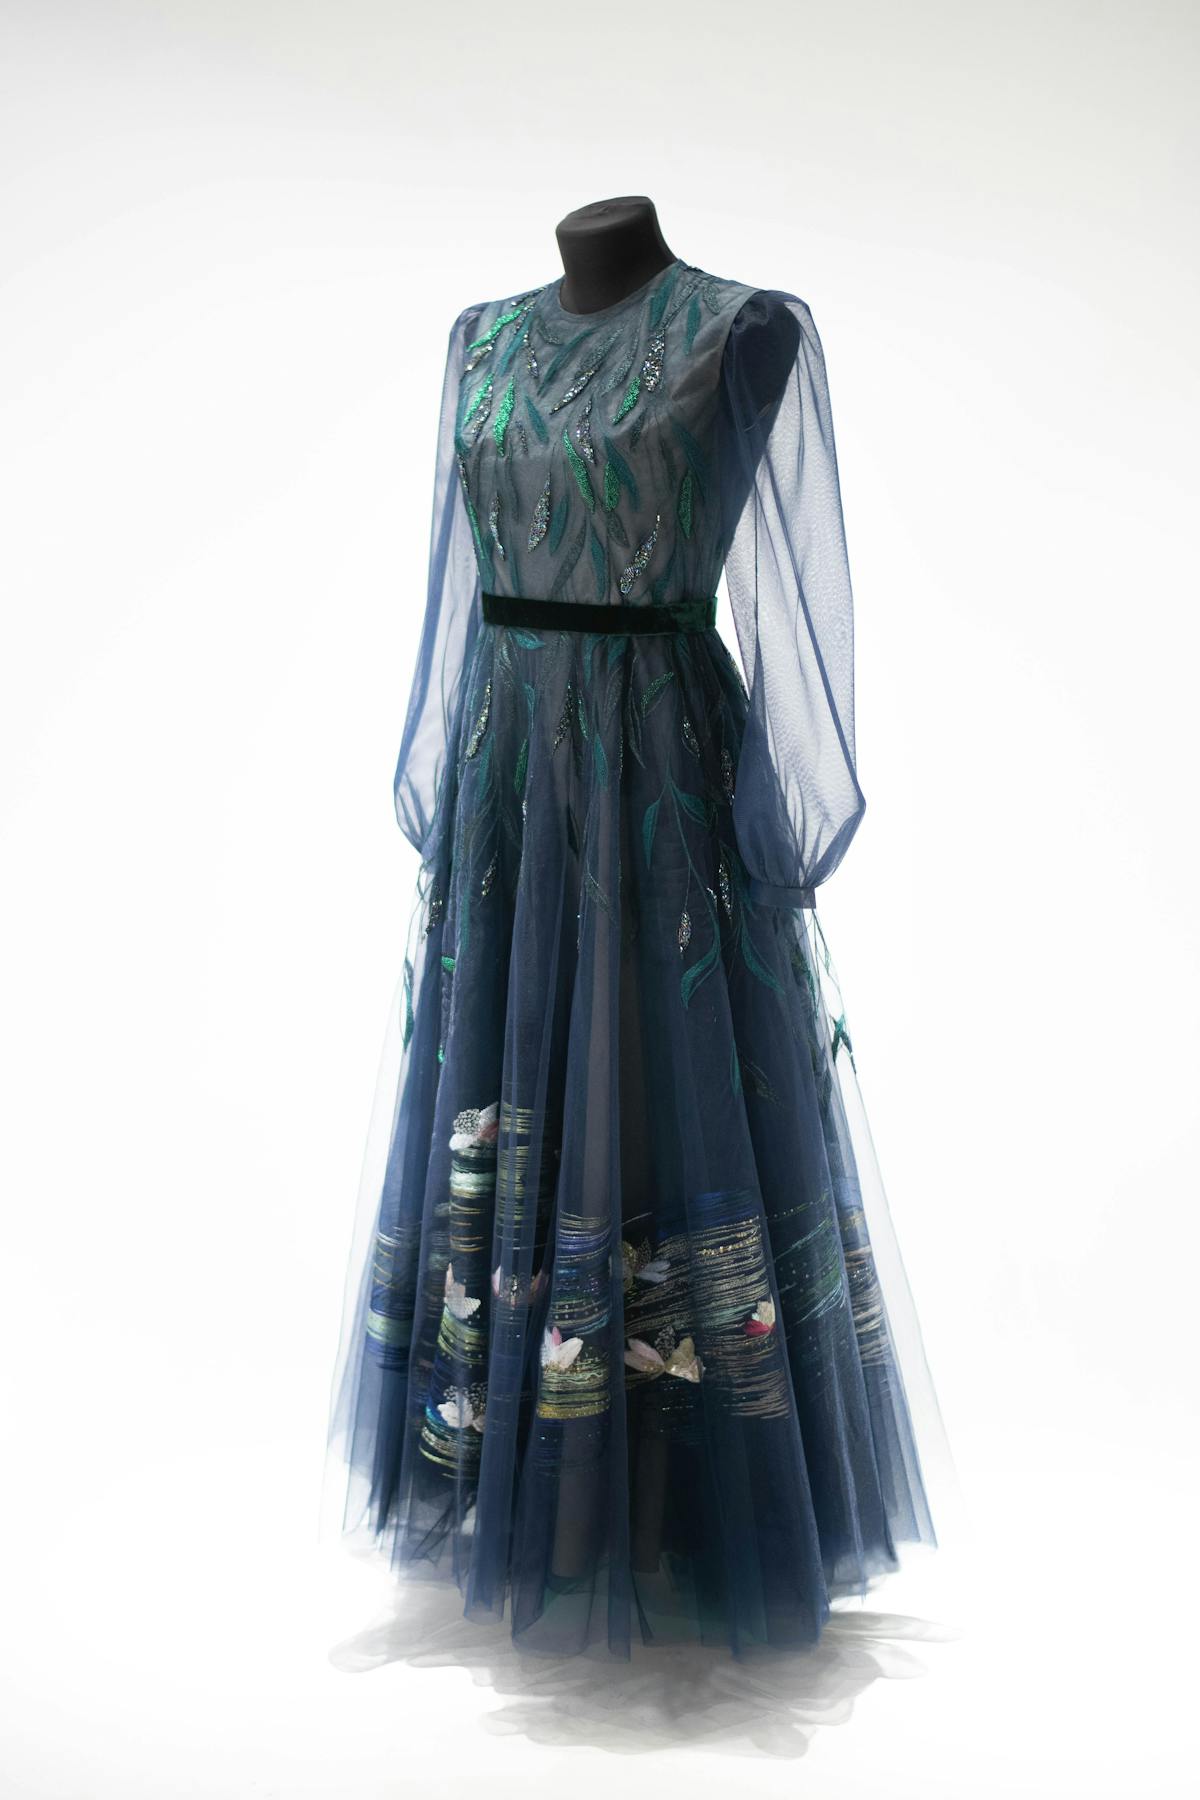 a full-length embroidered dress